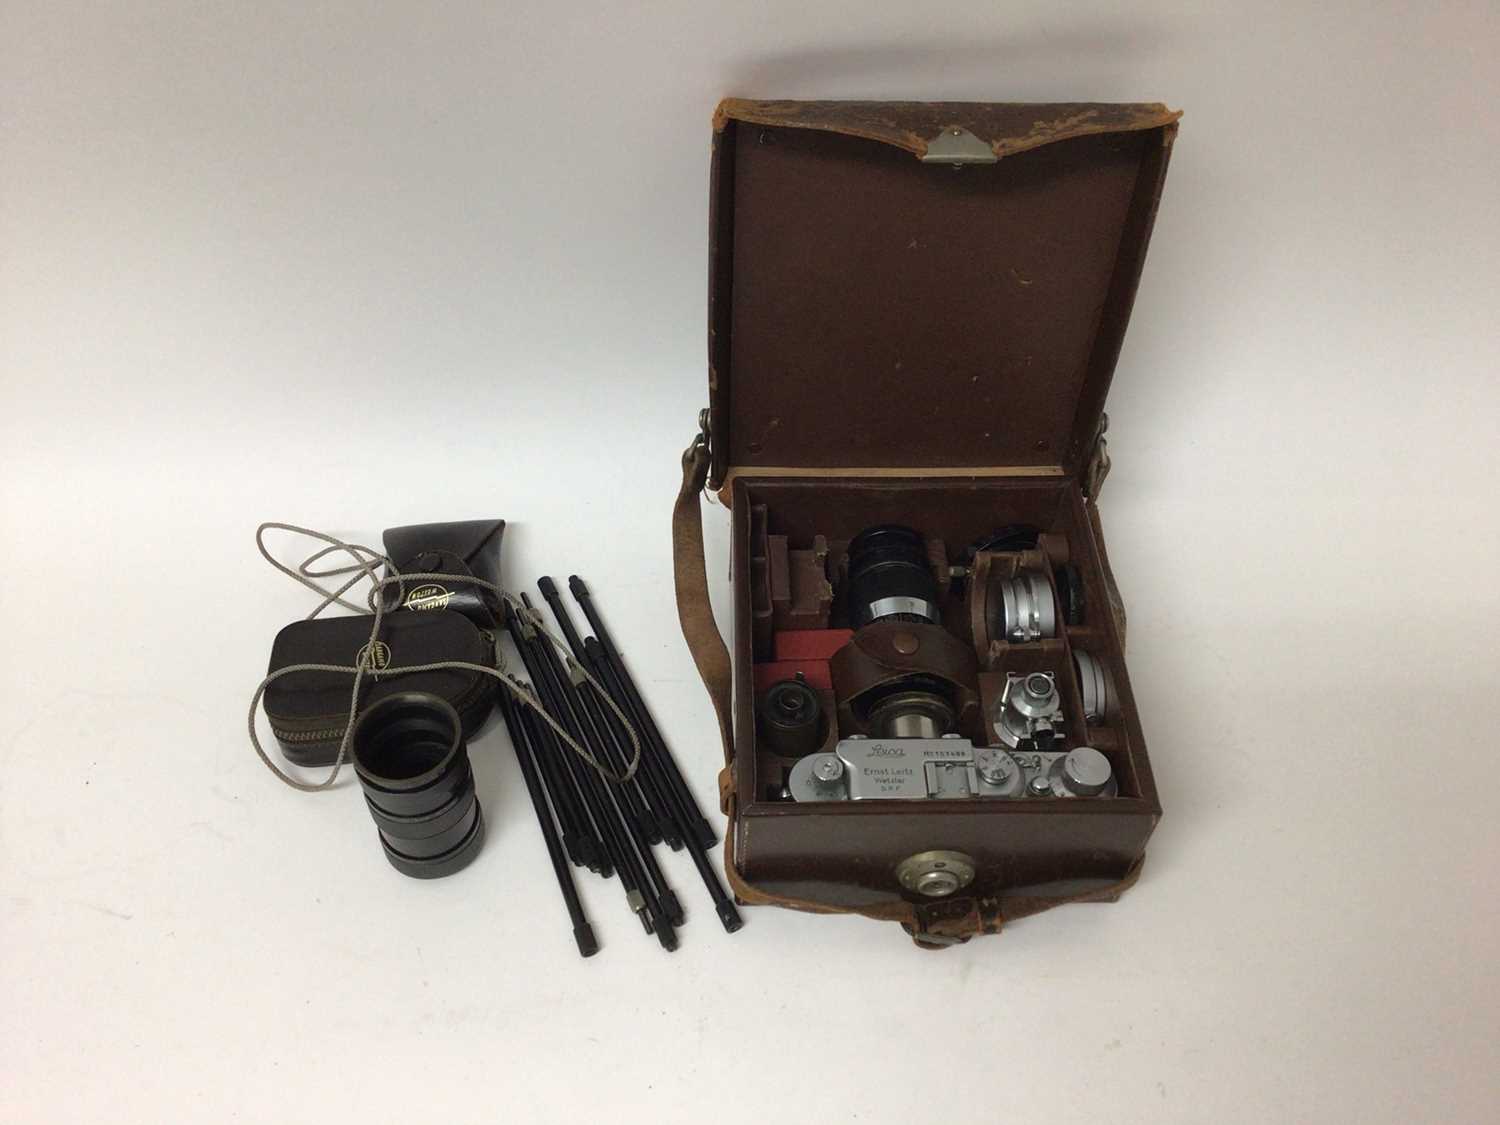 Lot 2355 - Leica III outfit dating from 1935, including body and three lenses (50mm Elmar, 35mm Elmar, 90mm Elmar), close-up lenses, cartridge spool, universal finder, and close up tube set, in original fitte...